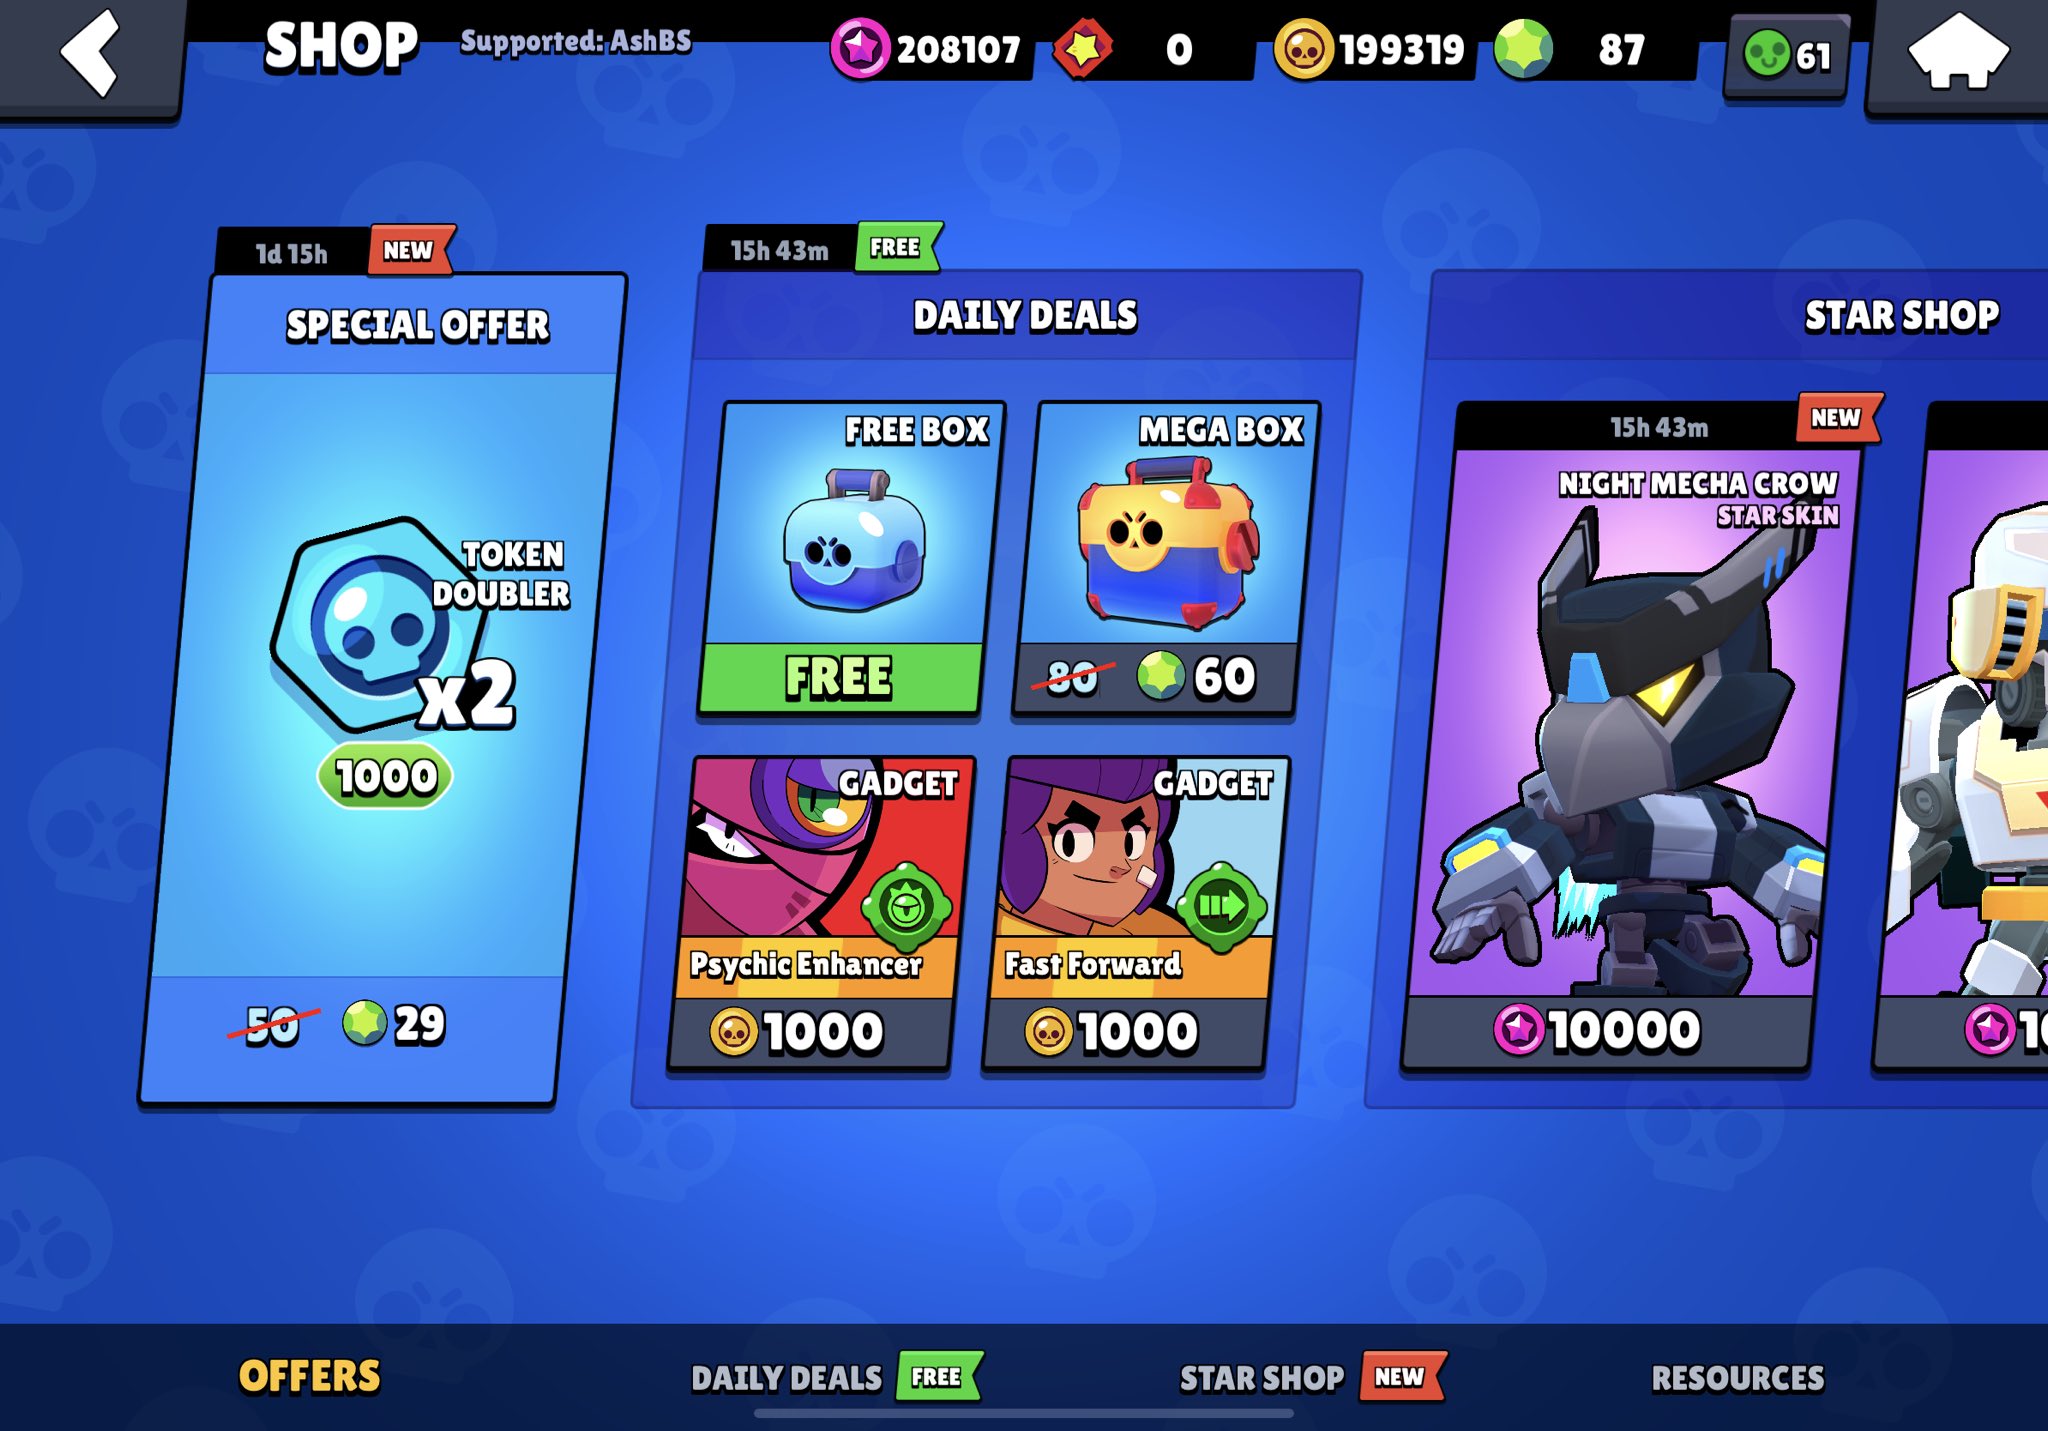 Code Ashbs On Twitter Sweet Also Guys Make Sure To Always Use Your Saved Gems To Buy The Token Doubler Special Offers They Are Always Worth The Gems Brawlstars Https T Co Uvg3k49icu - what are tokens in brawl stars